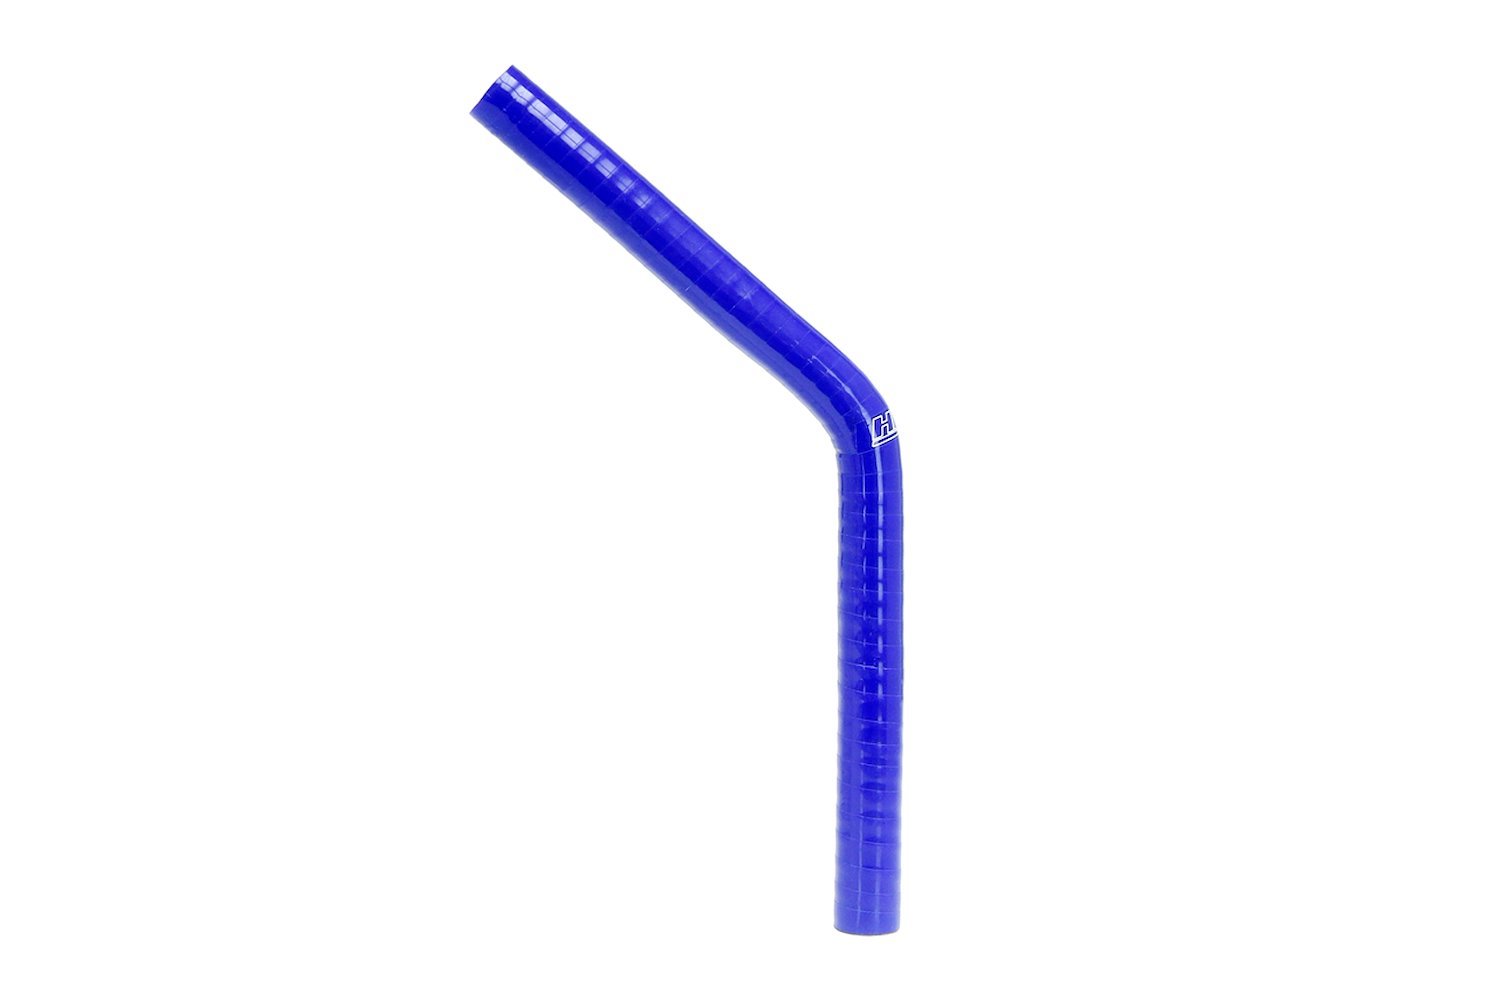 HTSEC45-162-L10-BLUE Silicone 45-Degree Elbow Hose, High-Temp 4-Ply Reinforced, 1-5/8 in. ID, 10 in. Leg, Blue